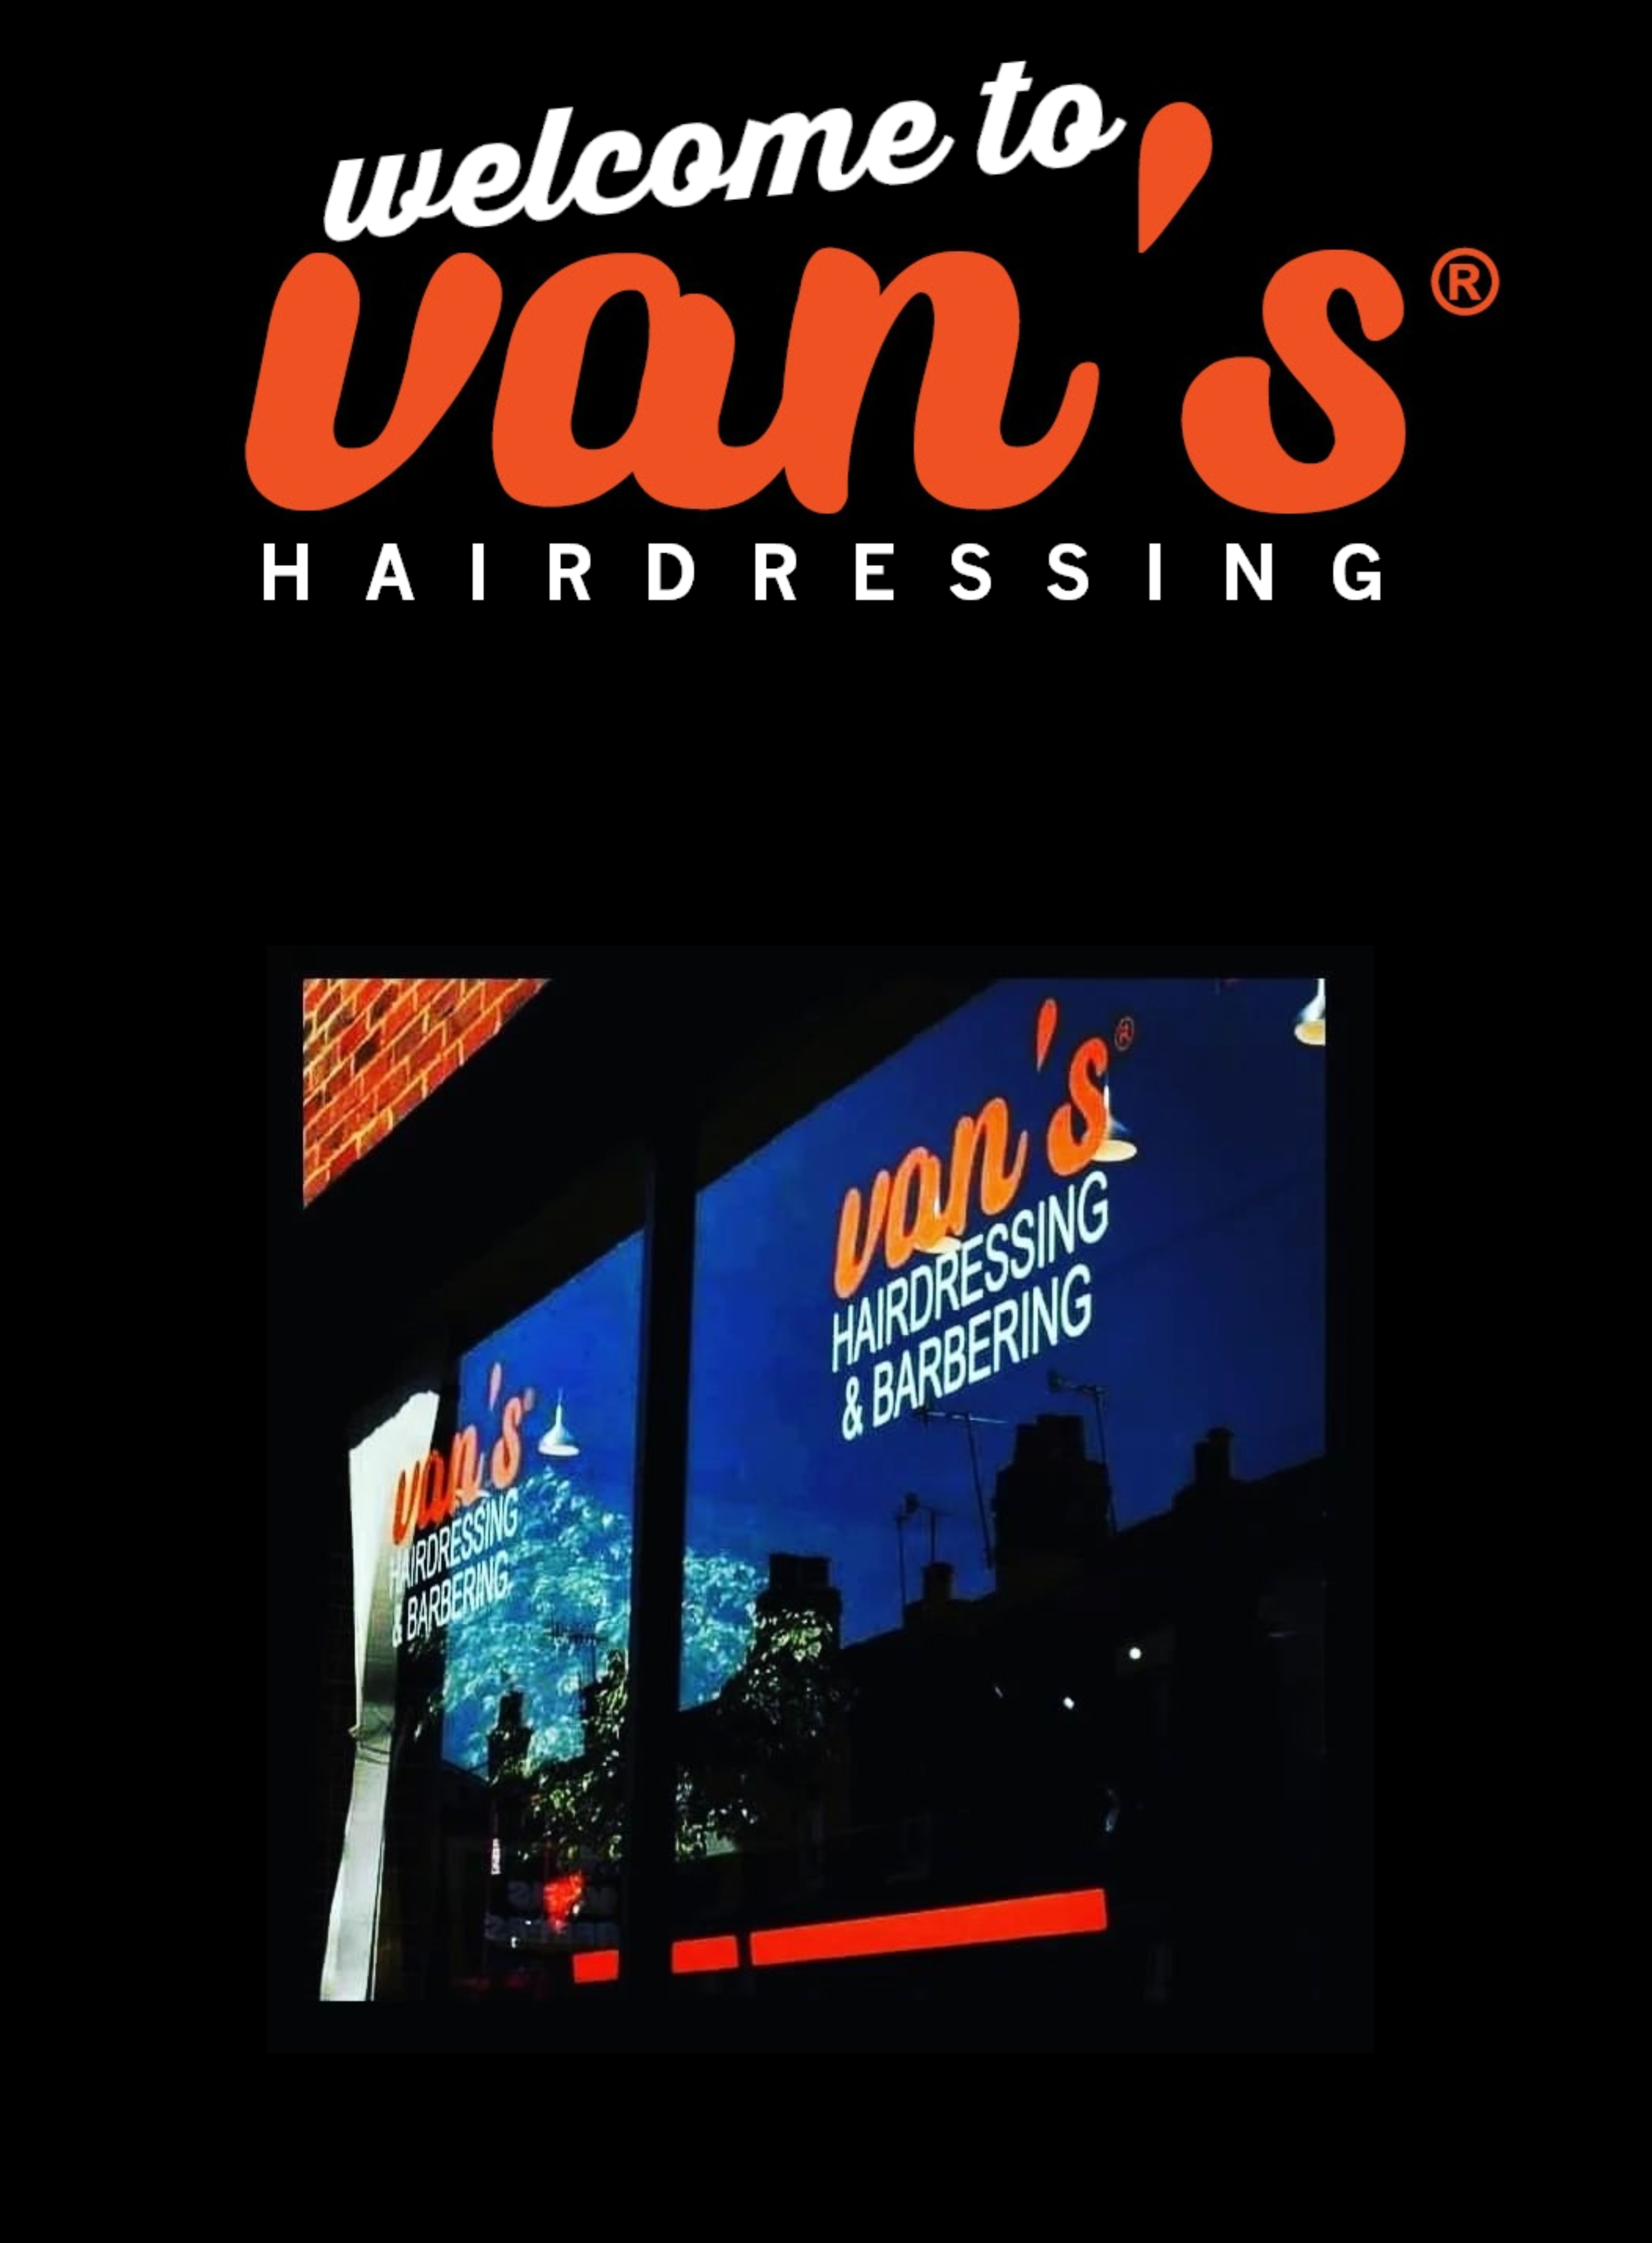 Welcome to vans hairdressing canterbury